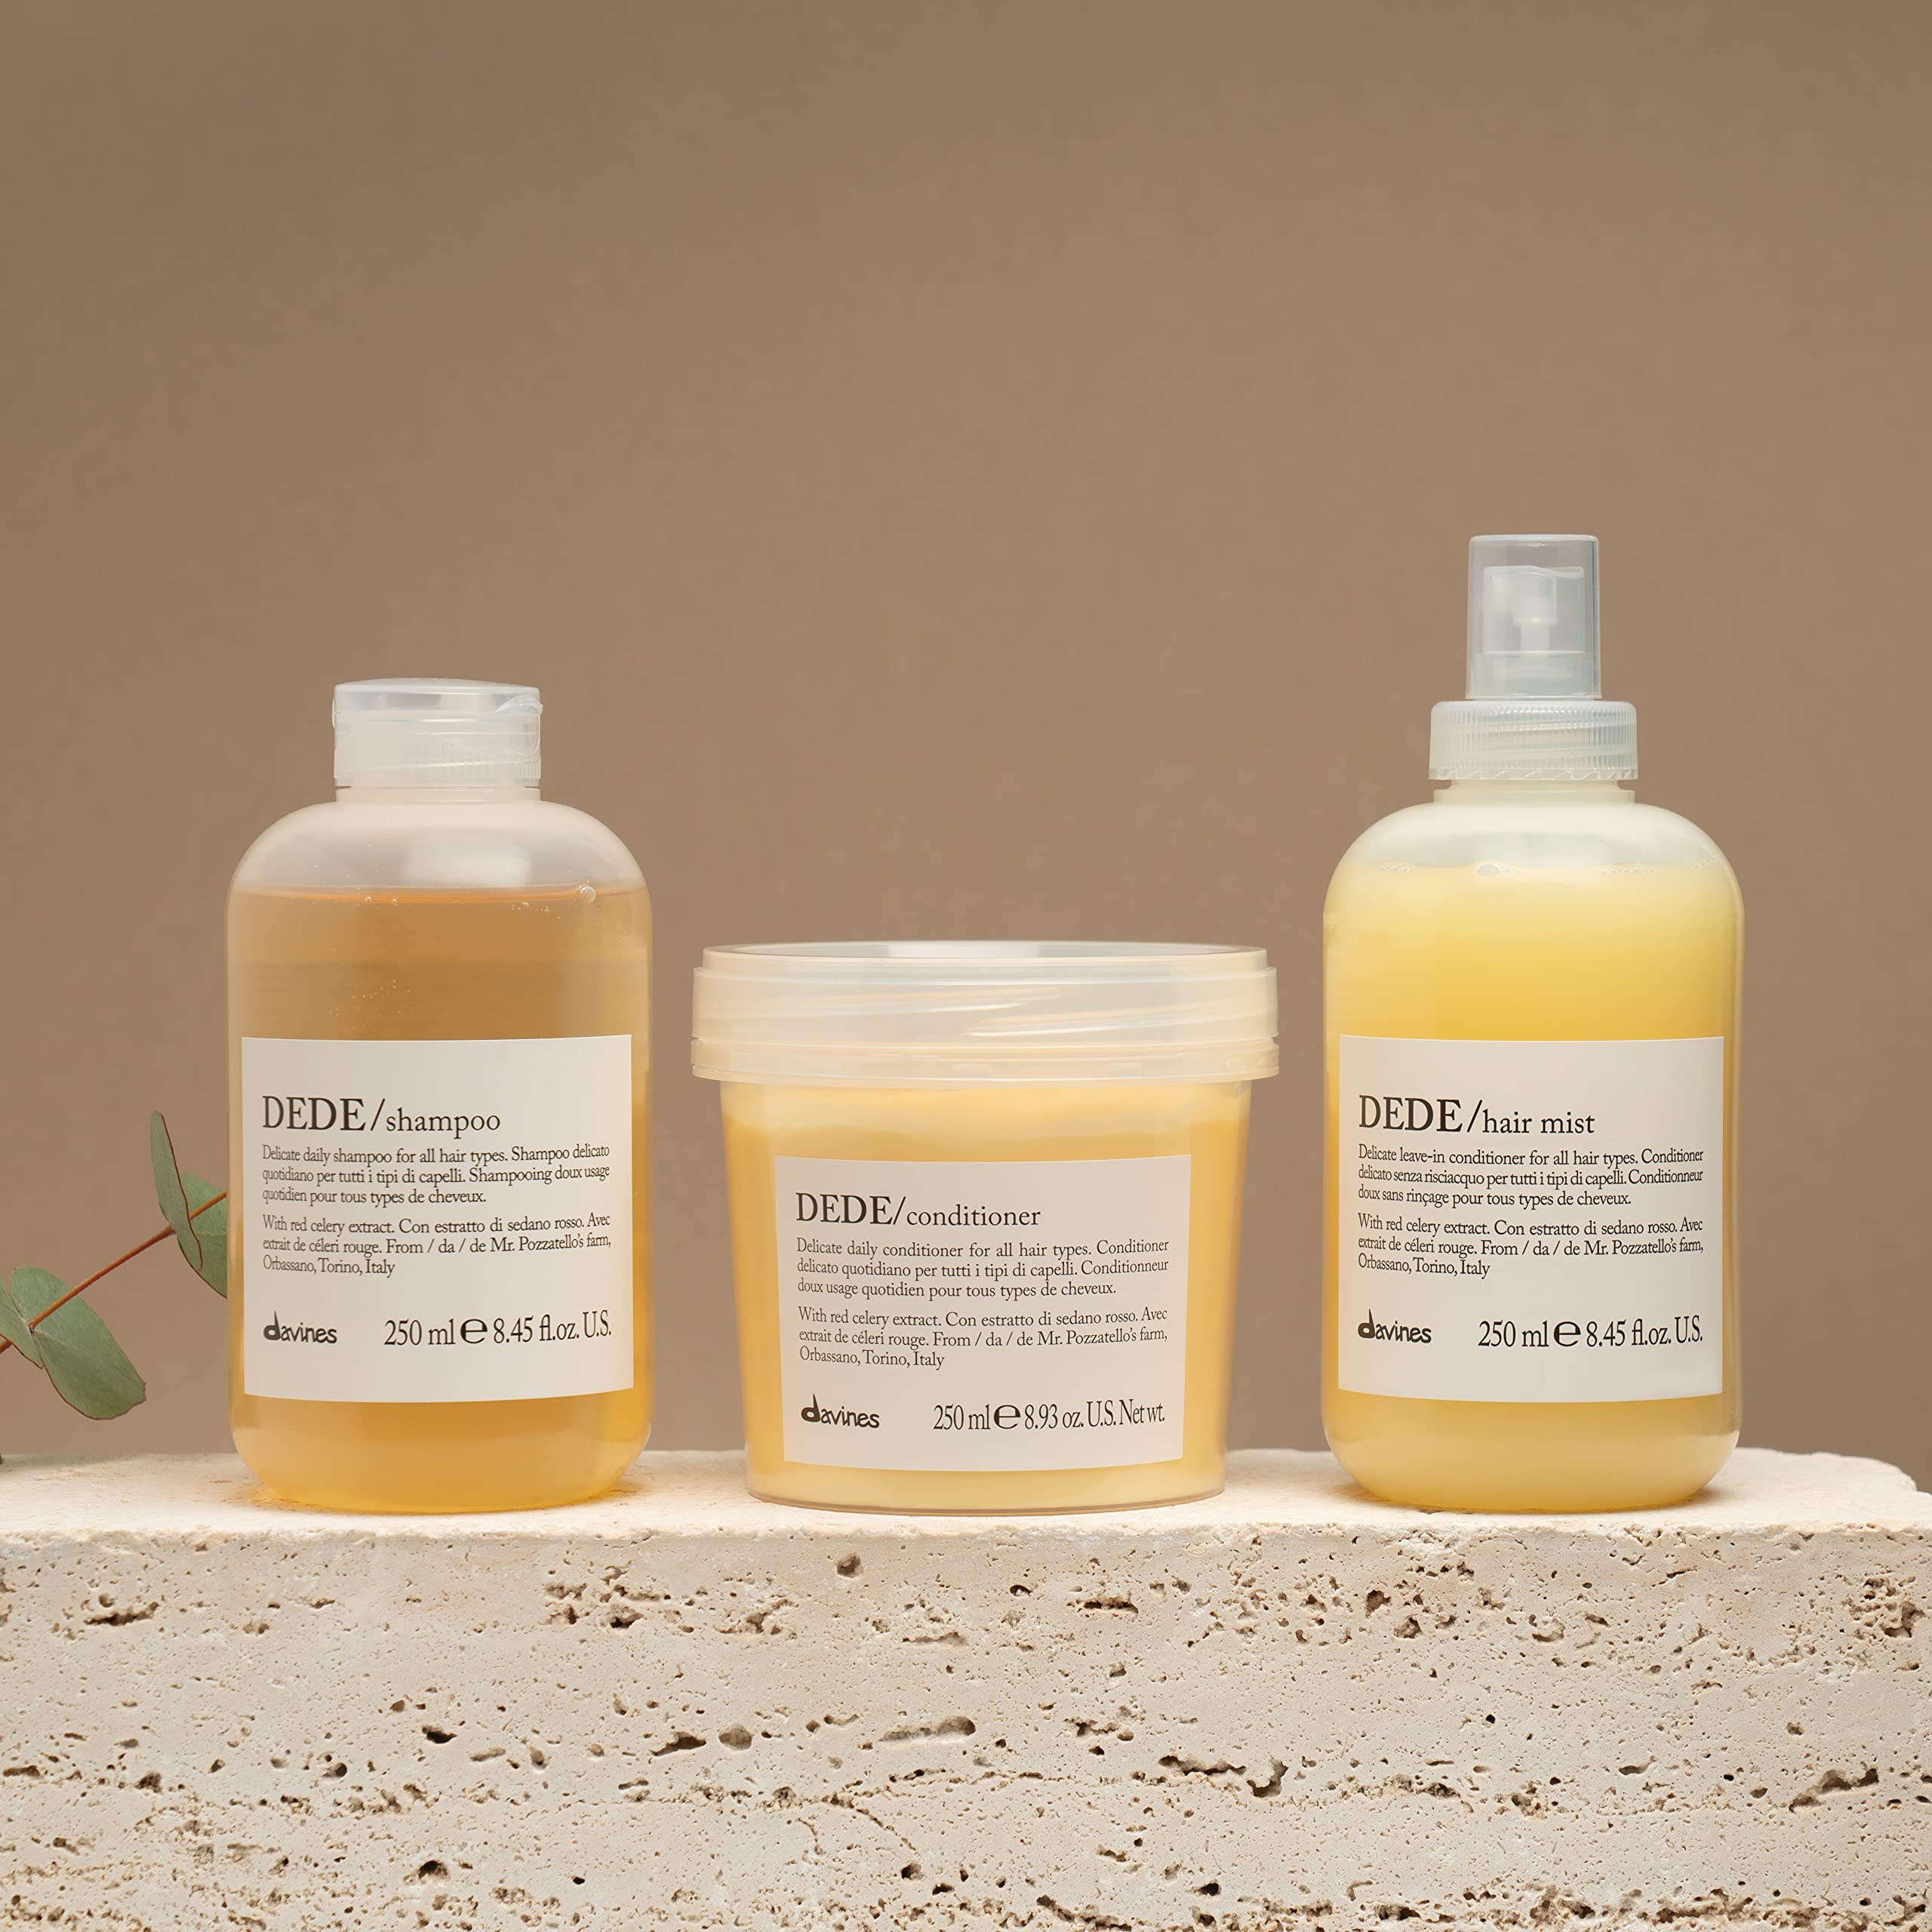 Davines DEDE Conditioner, Delicate Daily Conditioner for All Hair Types, Weightless Detangling